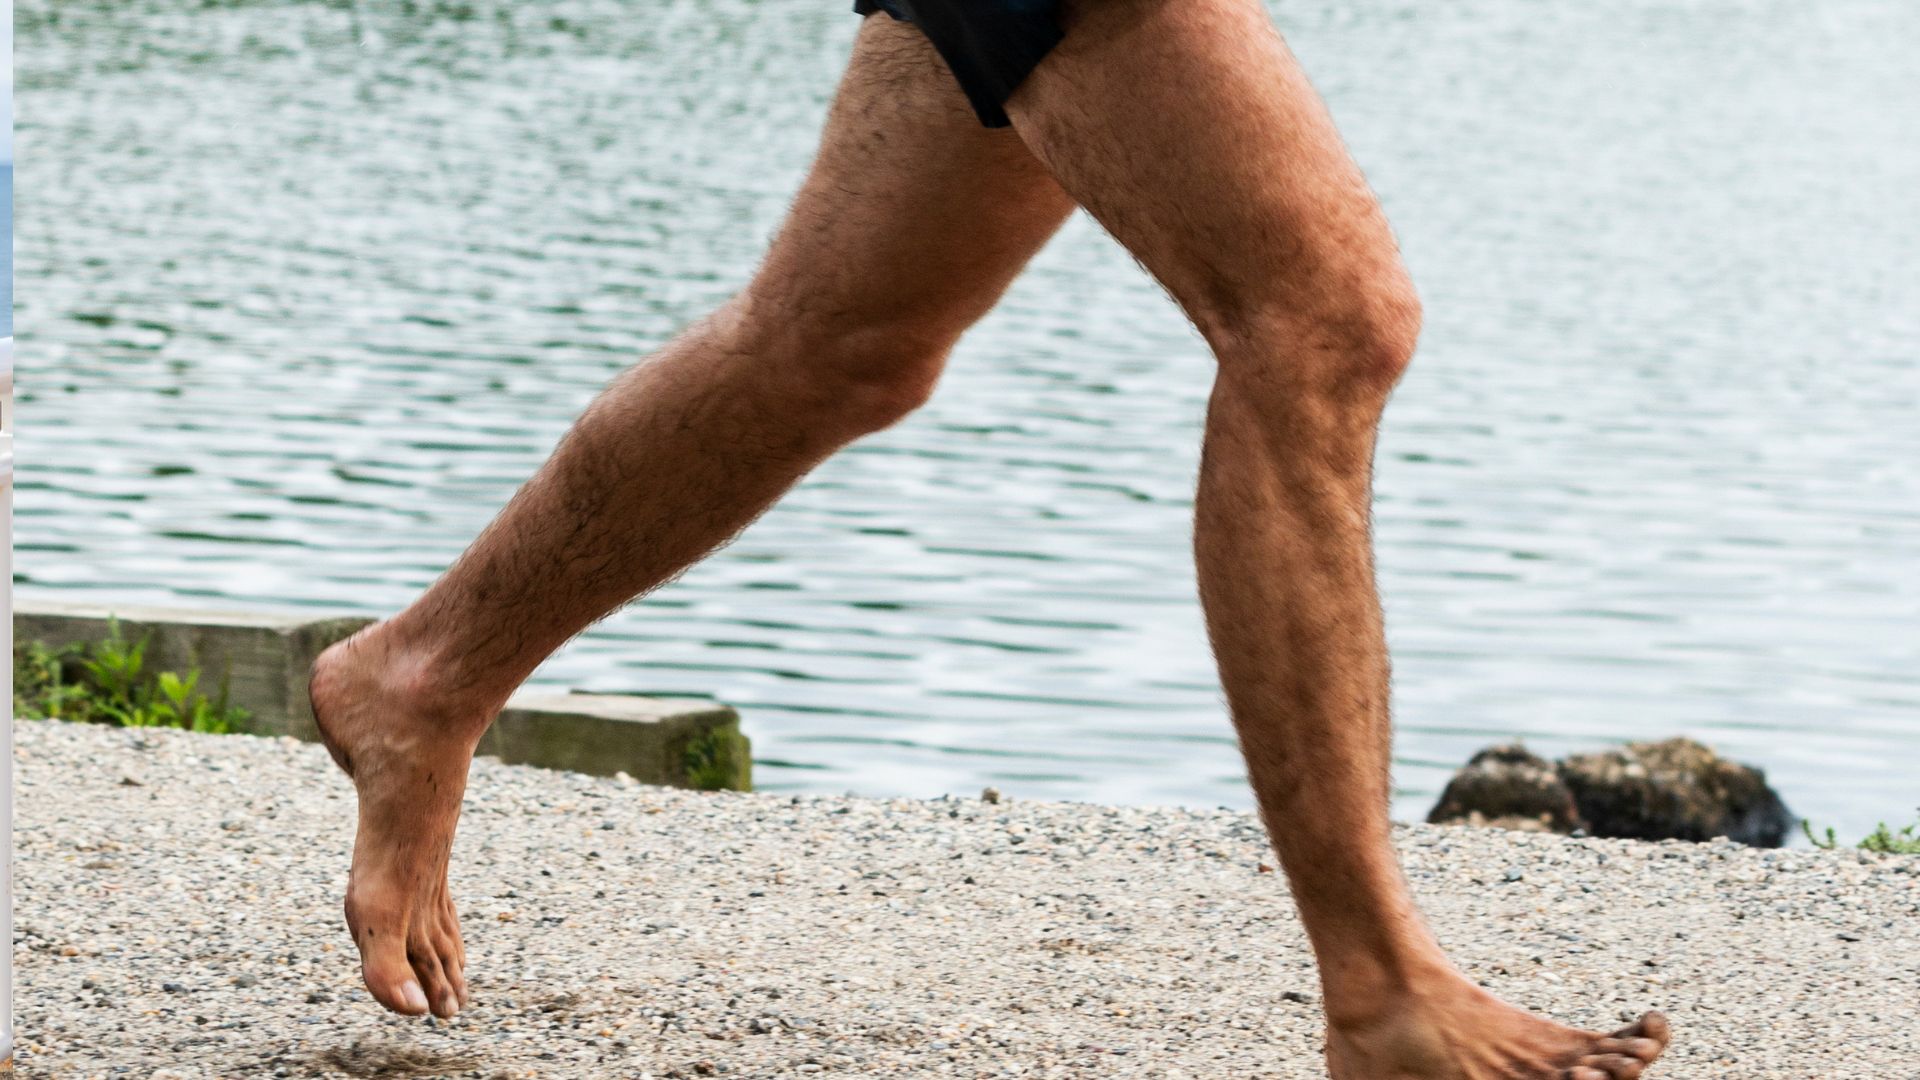 Barefoot Running - The Why and the How